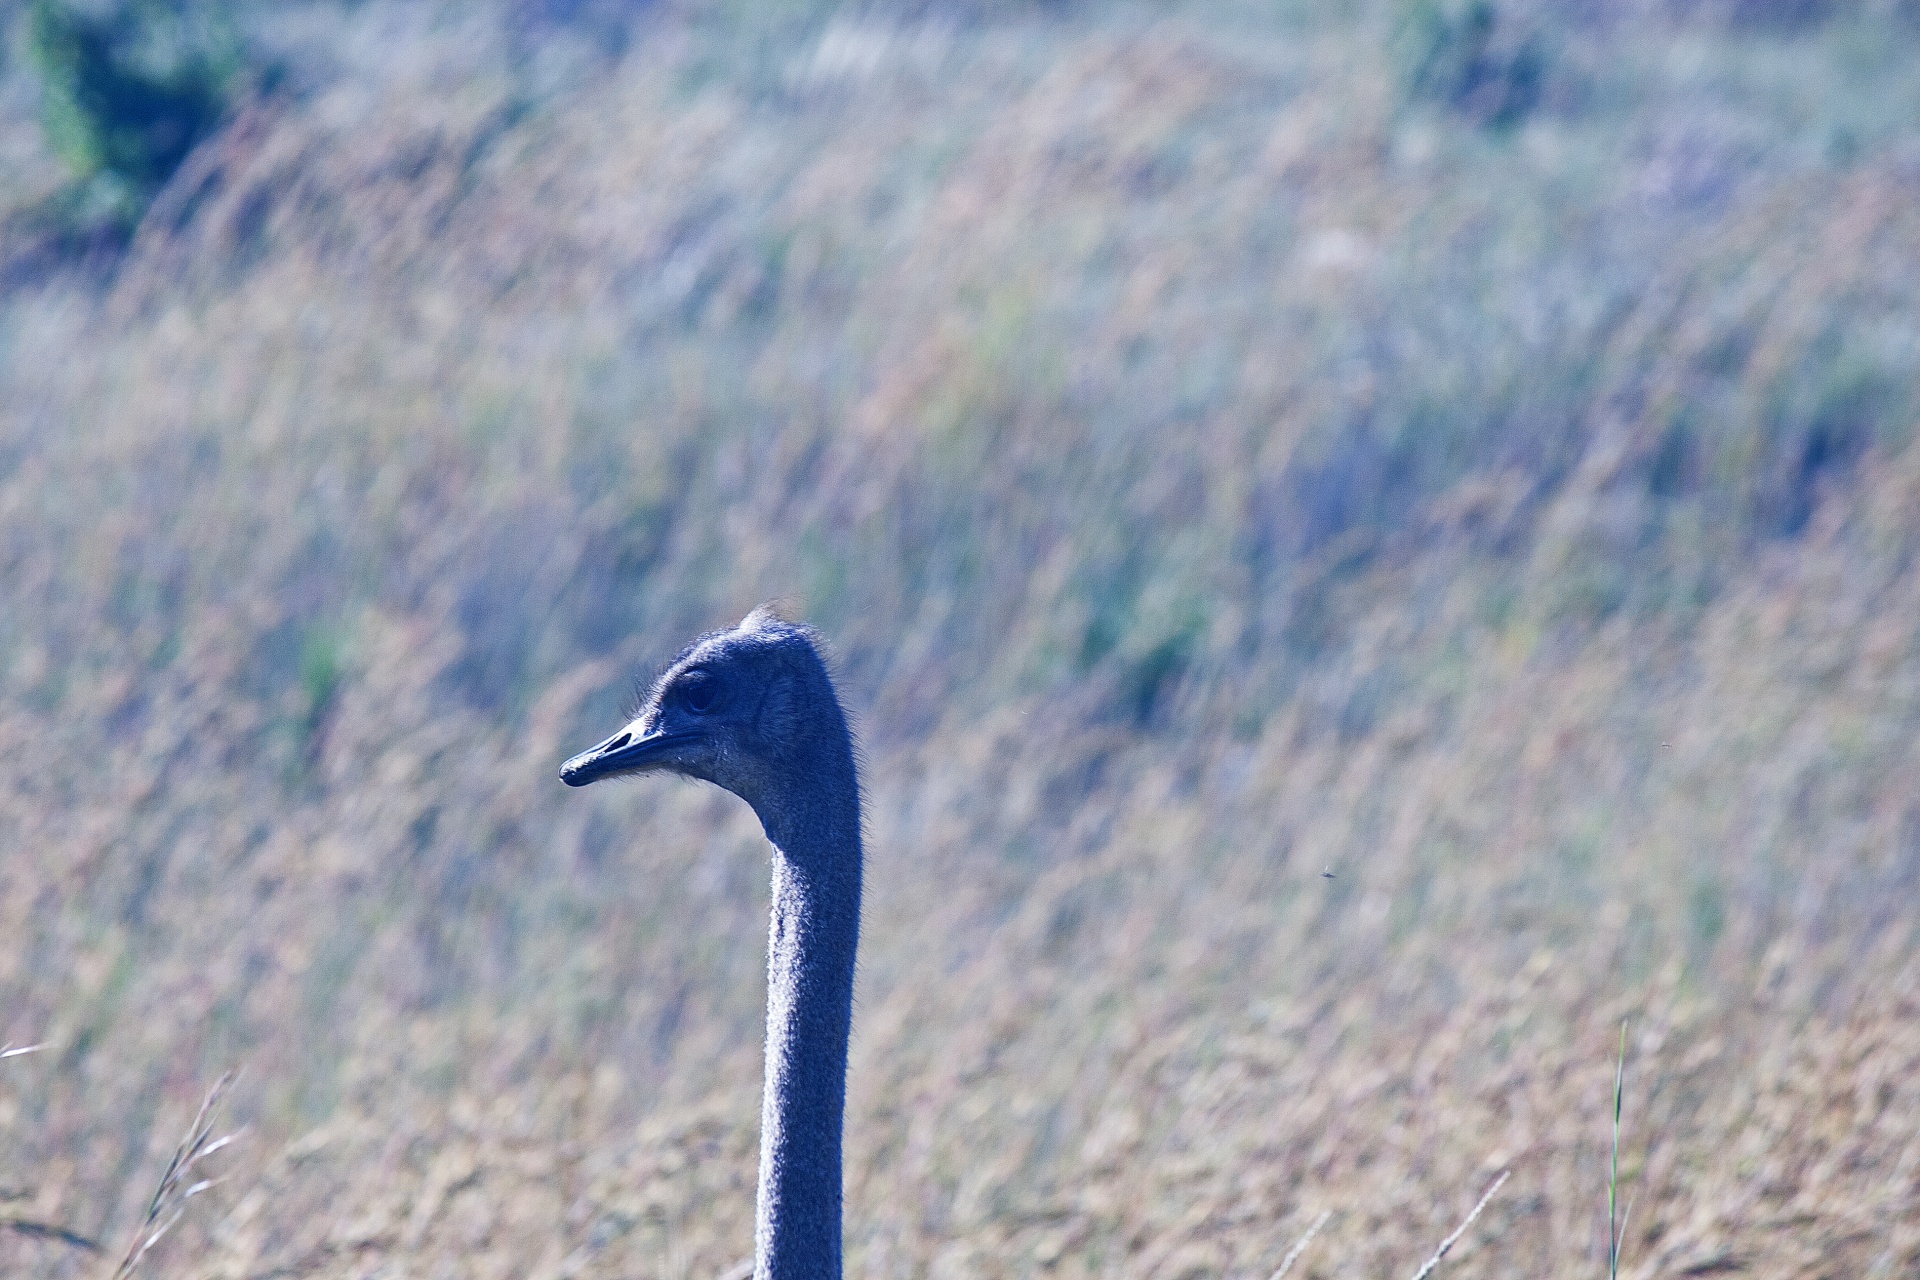 Sunlight On Face & Neck Of Ostrich